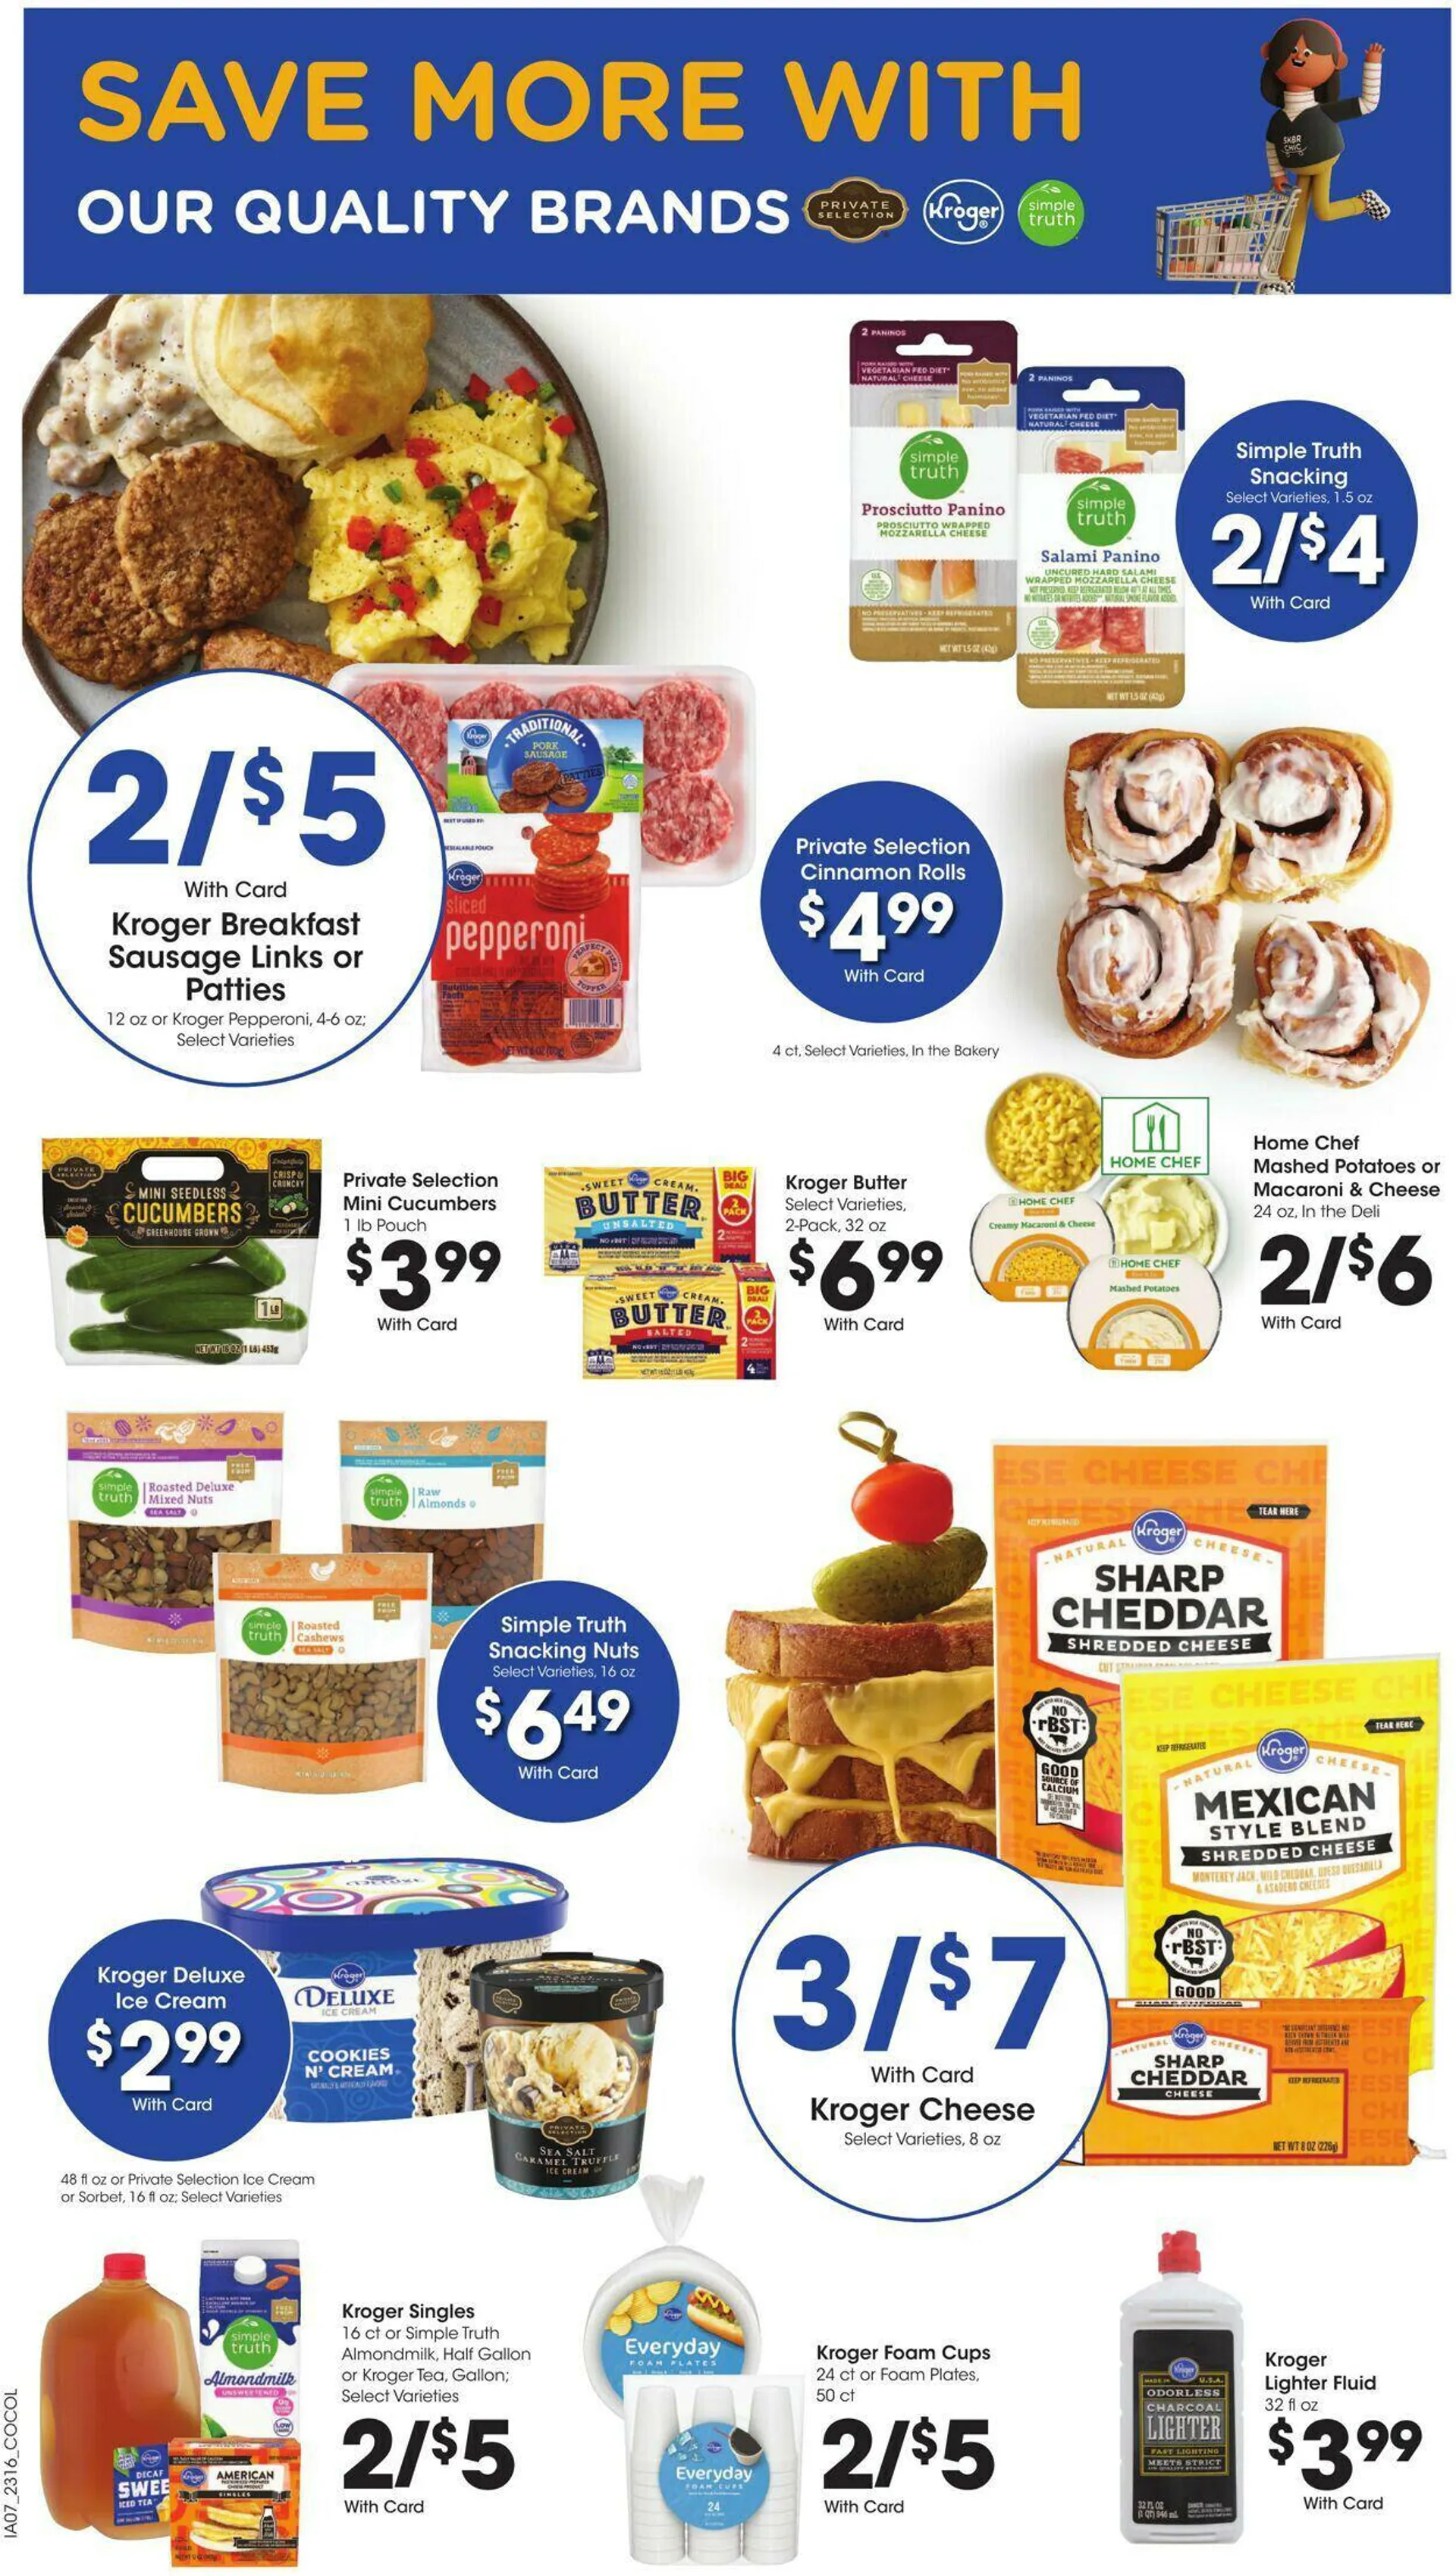 Kroger Current weekly ad - 12